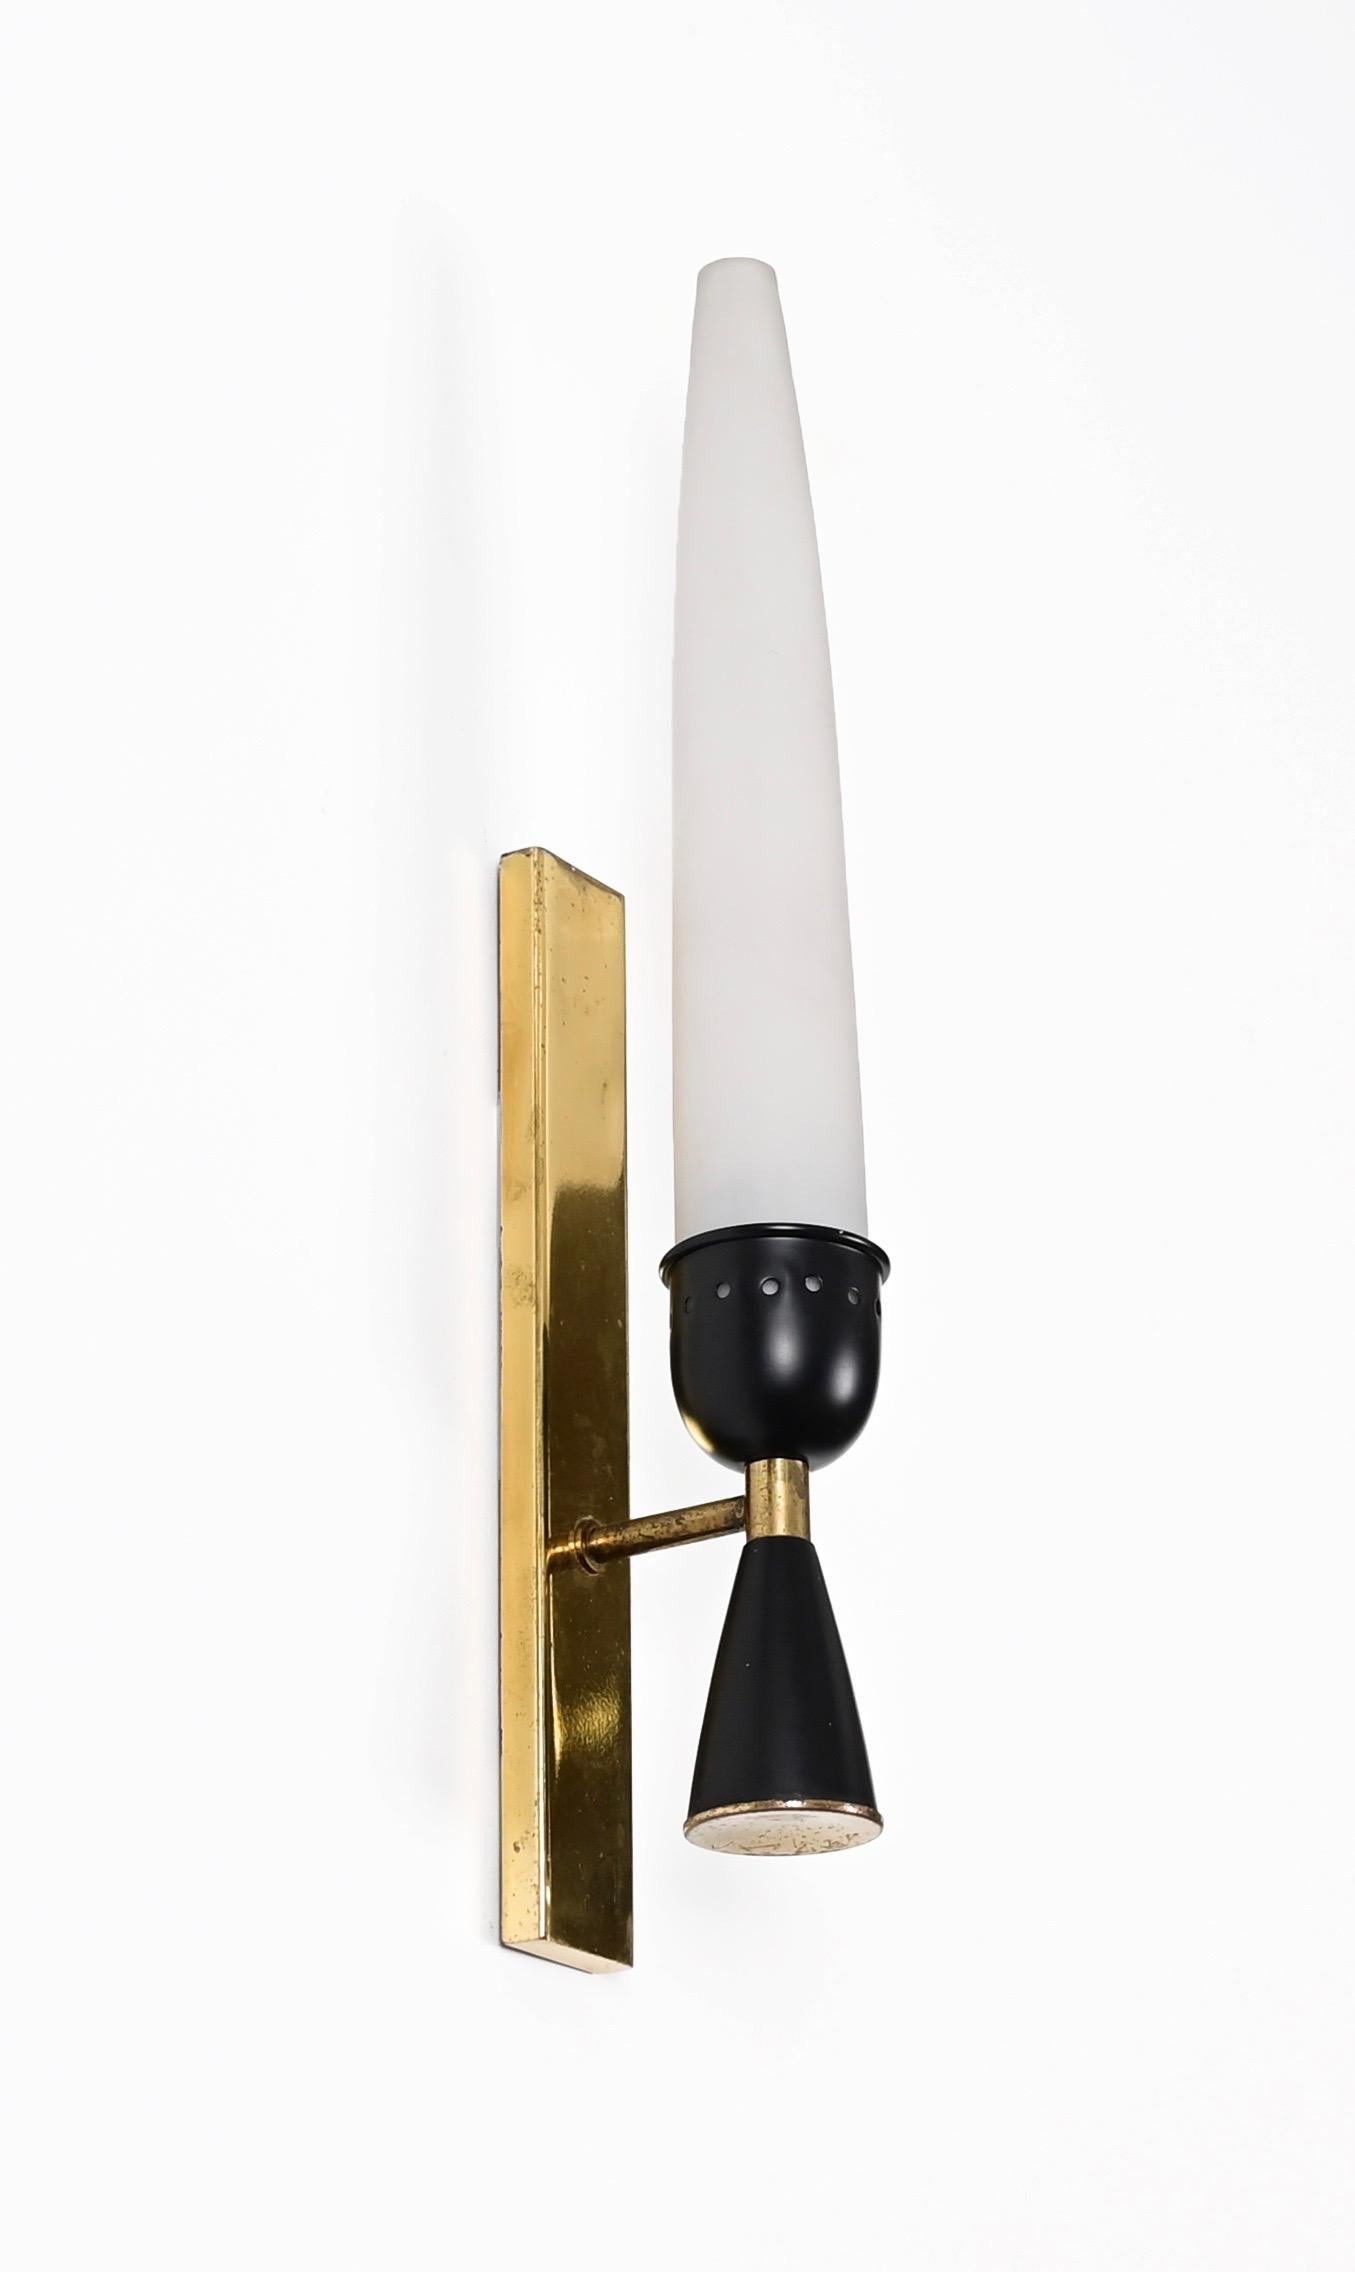 Fantastic pair of Mid-Century sconces in solid brass and opaline glass. This stunning wall lamps were designed by Stilnovo in Italy during the 1950s. 

This gorgeous sconces have a plate in solid brass with the arm in enameled black metal with brass